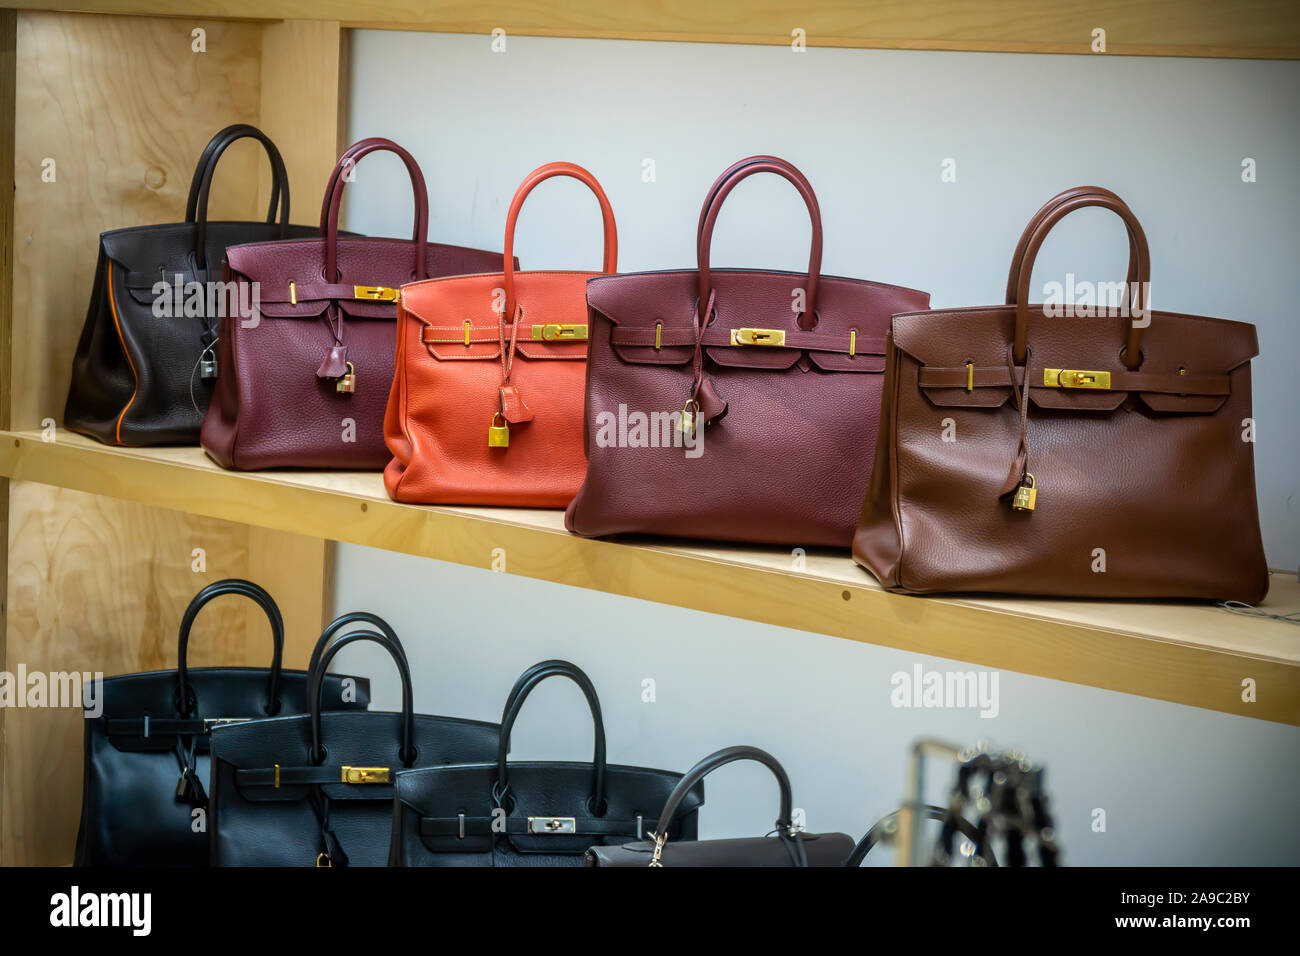 New York NY/USA-November 12, 2019 The Rebag store in the World Trade Center Transportation Hub, The Oculus, in New York on Tuesday, November 12, 2019. Rebag is essentially a second hand store for luxury handbags. (© Richard B. Levine) Stock Photo